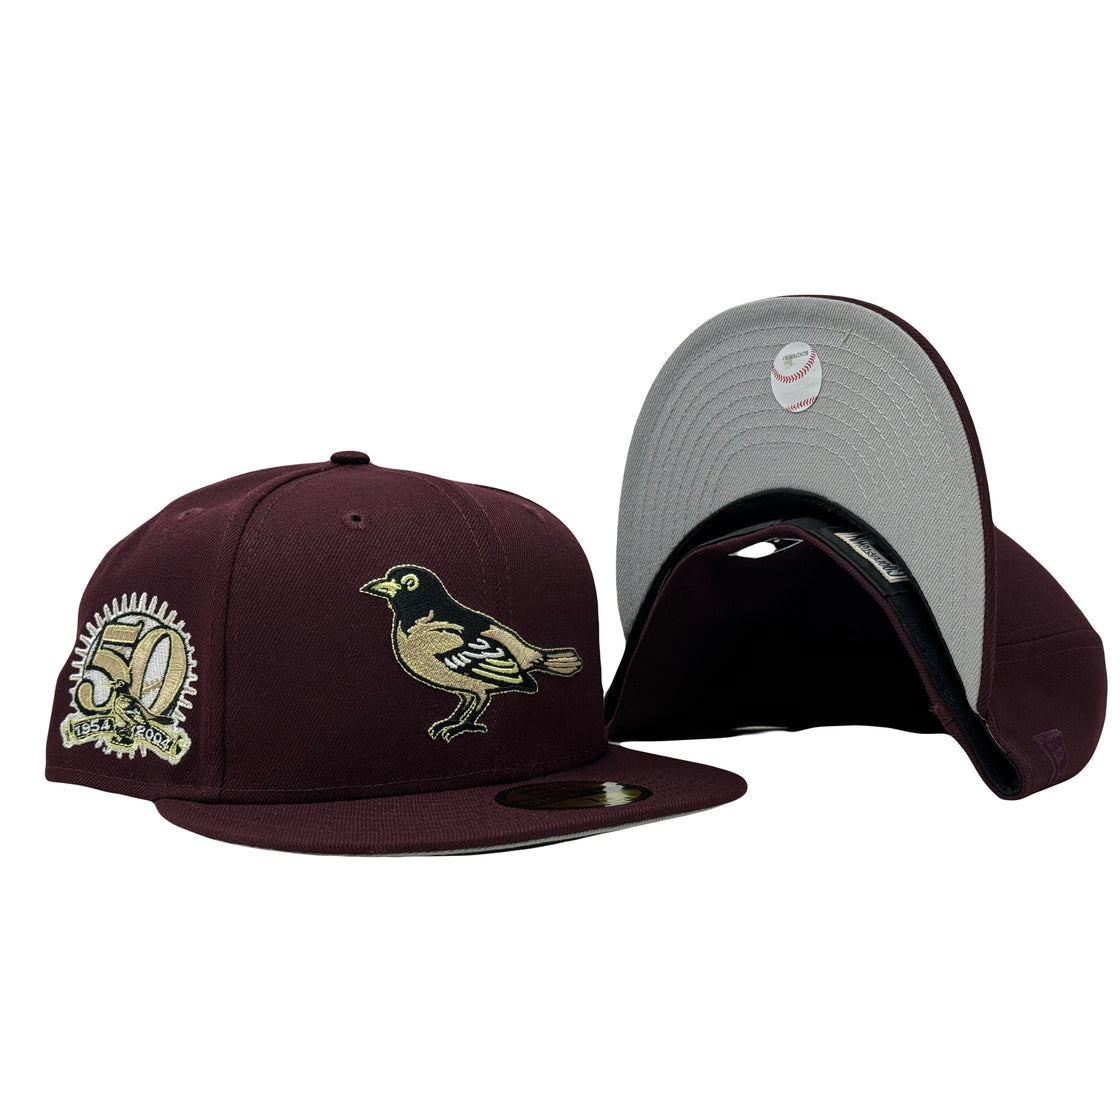 Baltimore Orioles 50th Anniversary Maroon 5950 New Era Fitted Hat